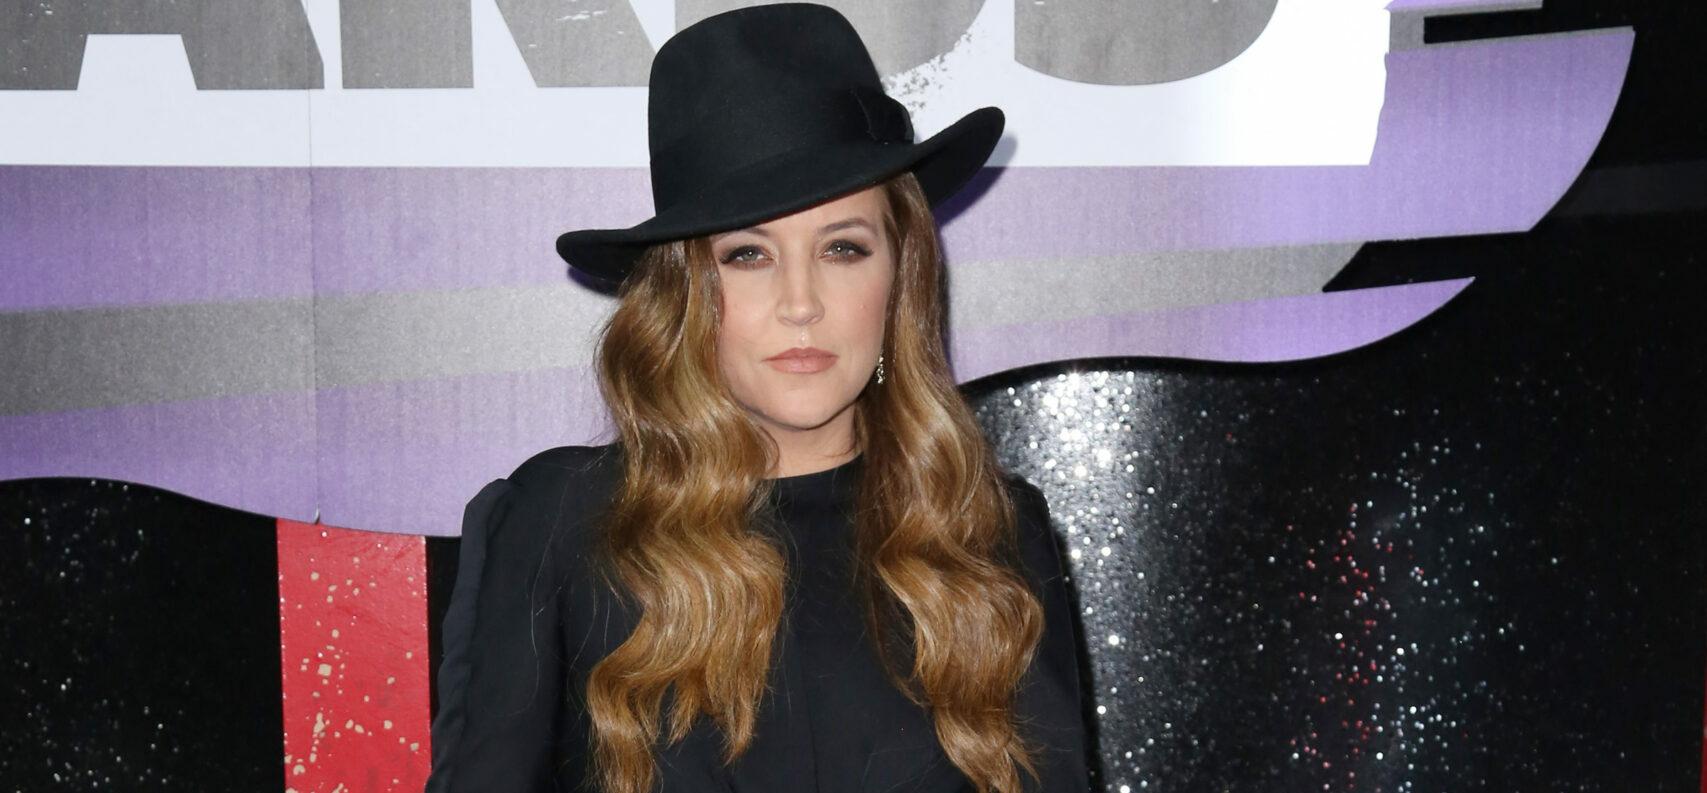 Lisa Marie Presley’s Condition Look Grim, On Life Support Following Cardiac Arrest